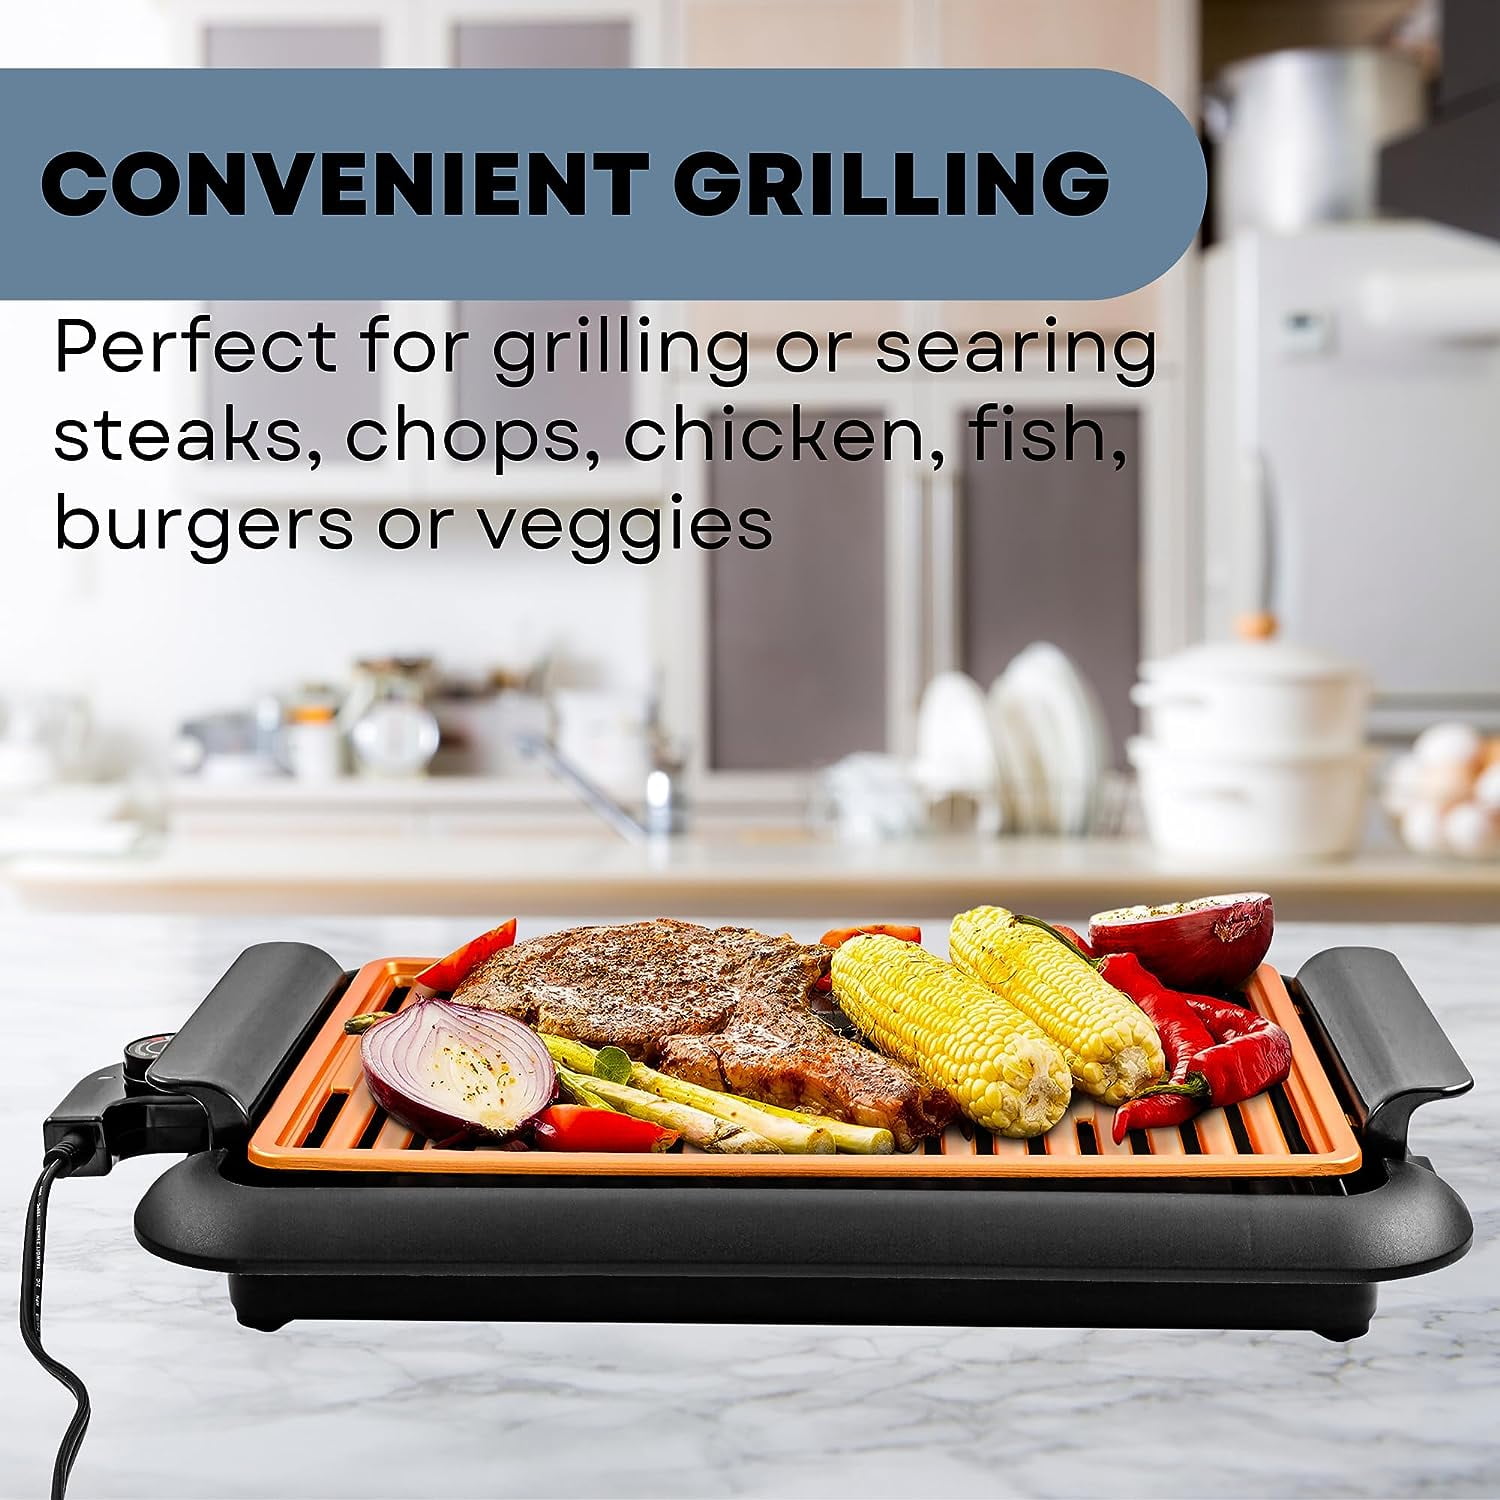 2500W 24 W x 19'' D Indoor/Outdoor Use Countertop Electric Grill